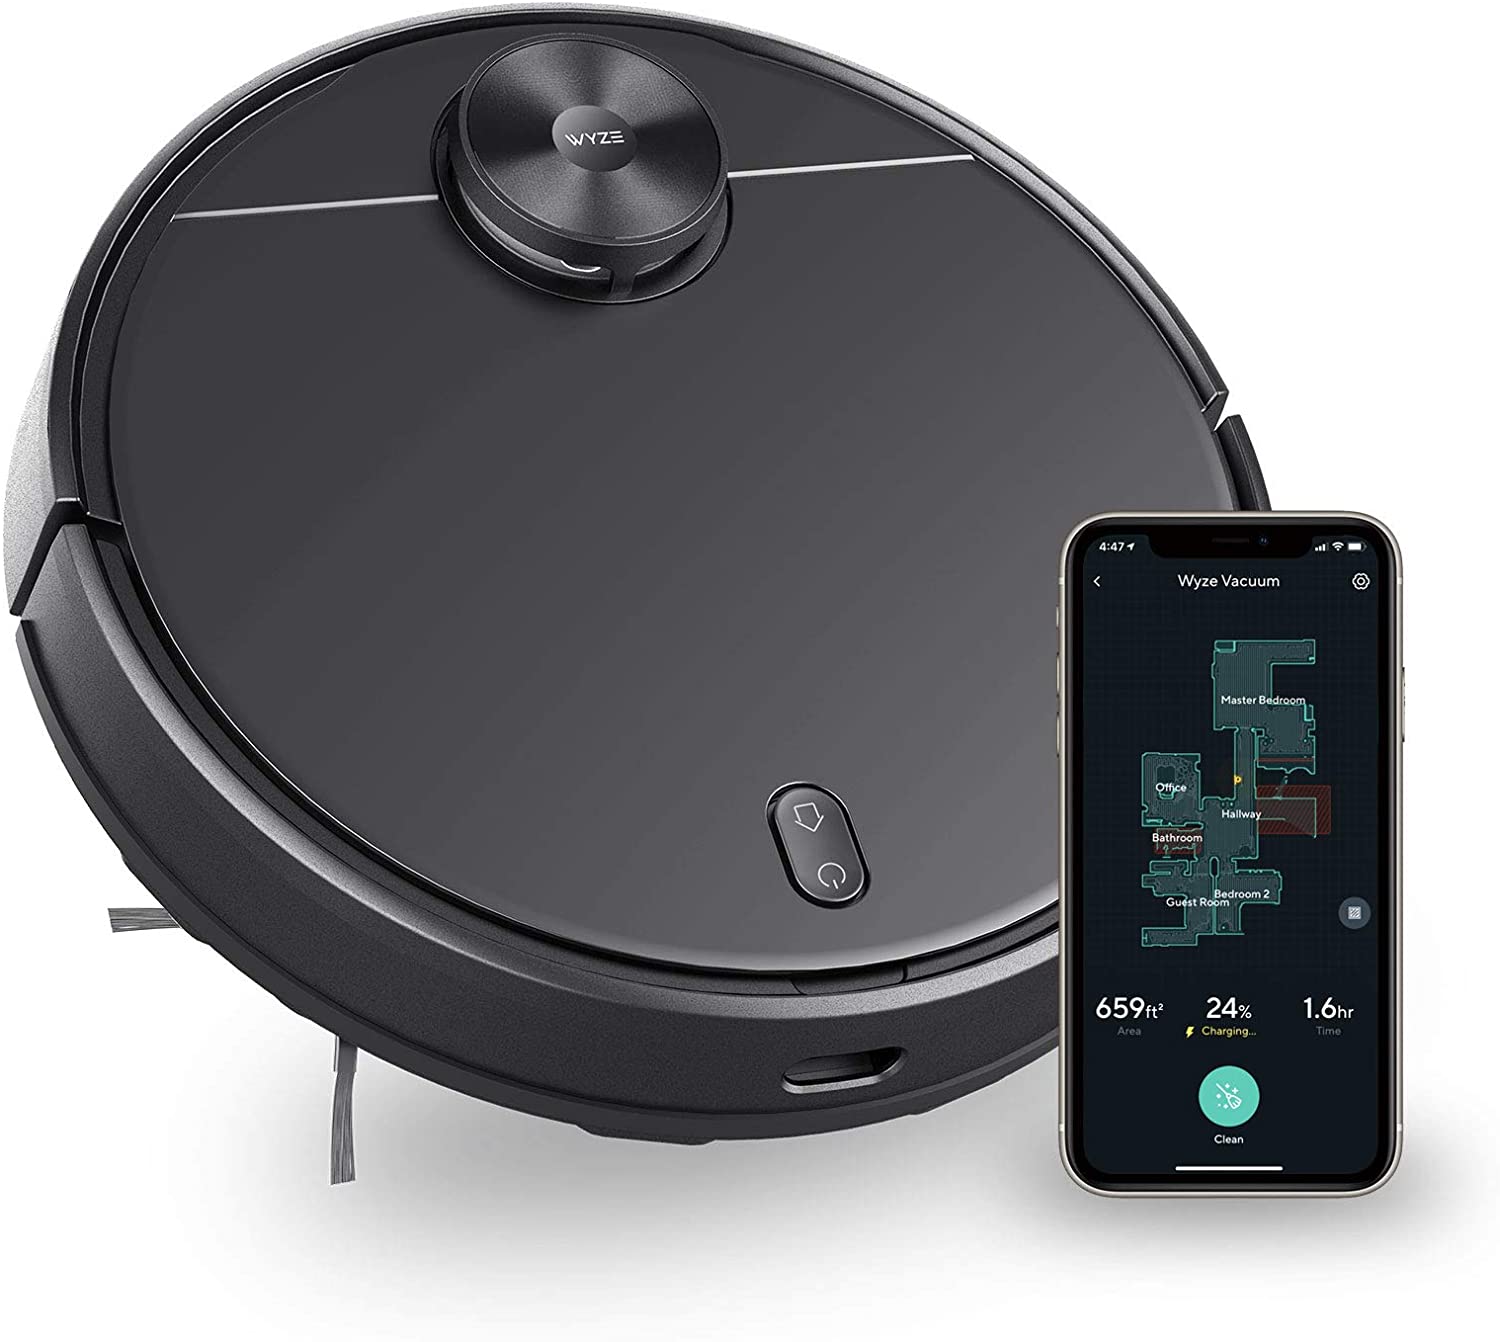 Wyze 2100Pa Strong Suction Robot Vacuum with LIDAR Mapping Technology - $227.78 w/ free shipping